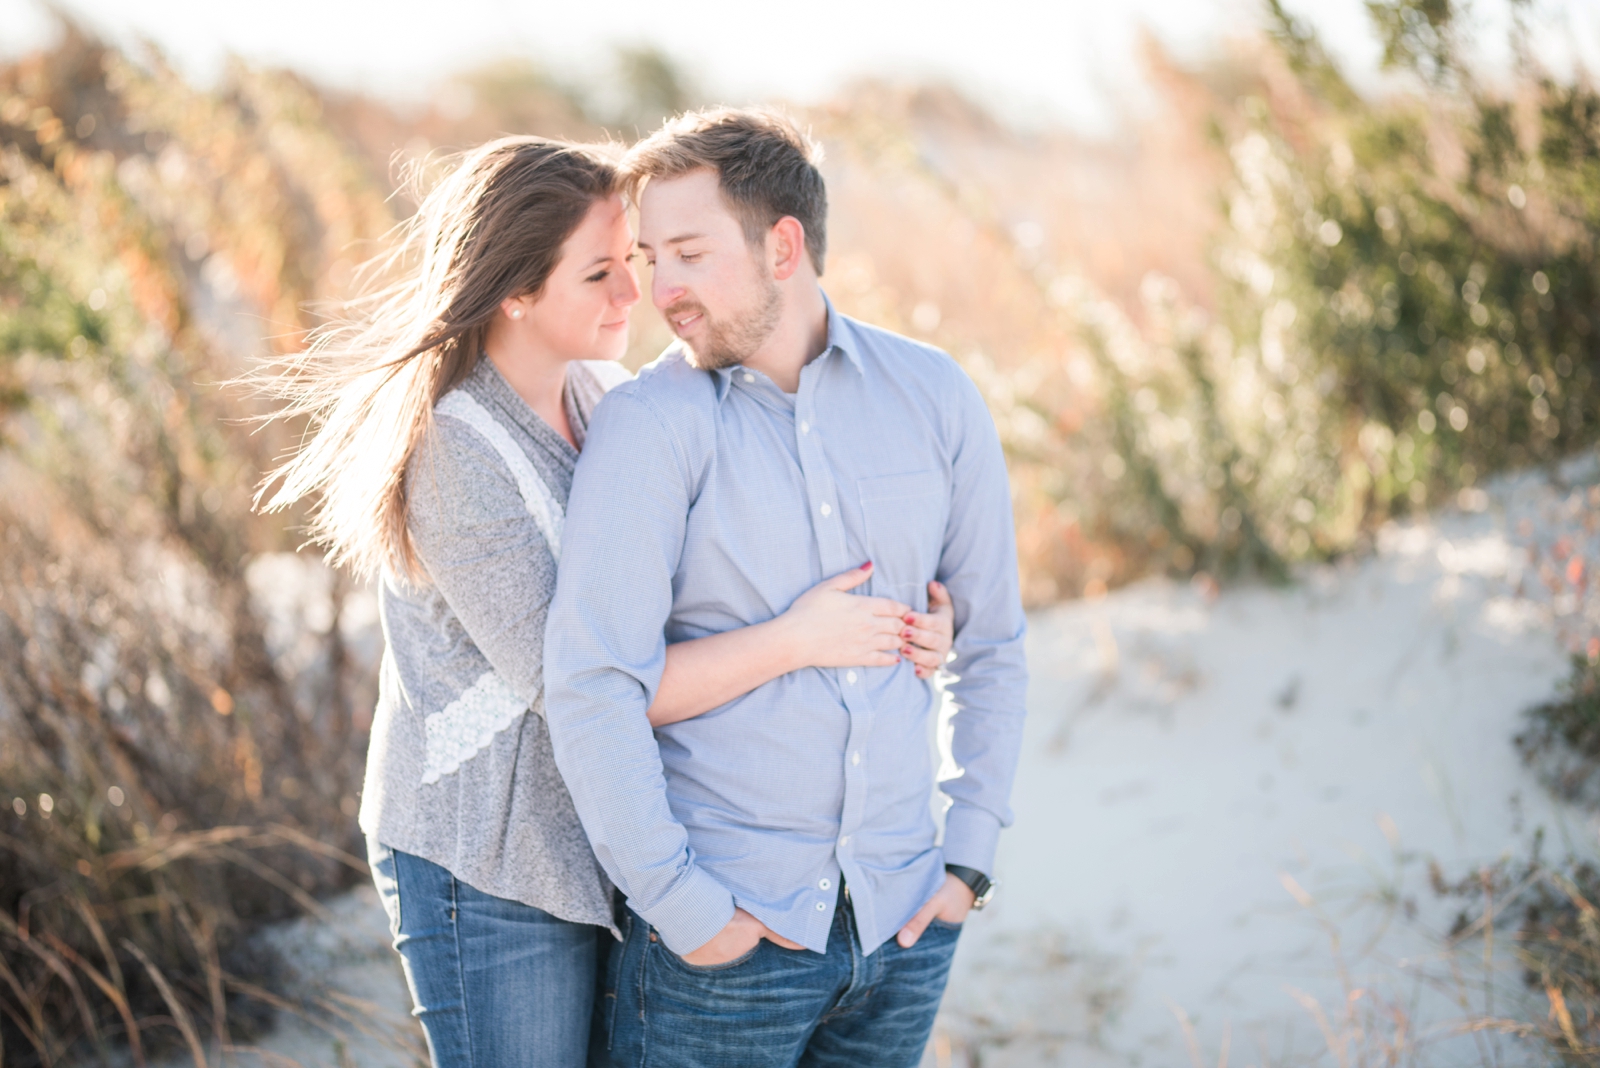 downtown-norfolk-winter-engagement-session-photo_7253.jpg